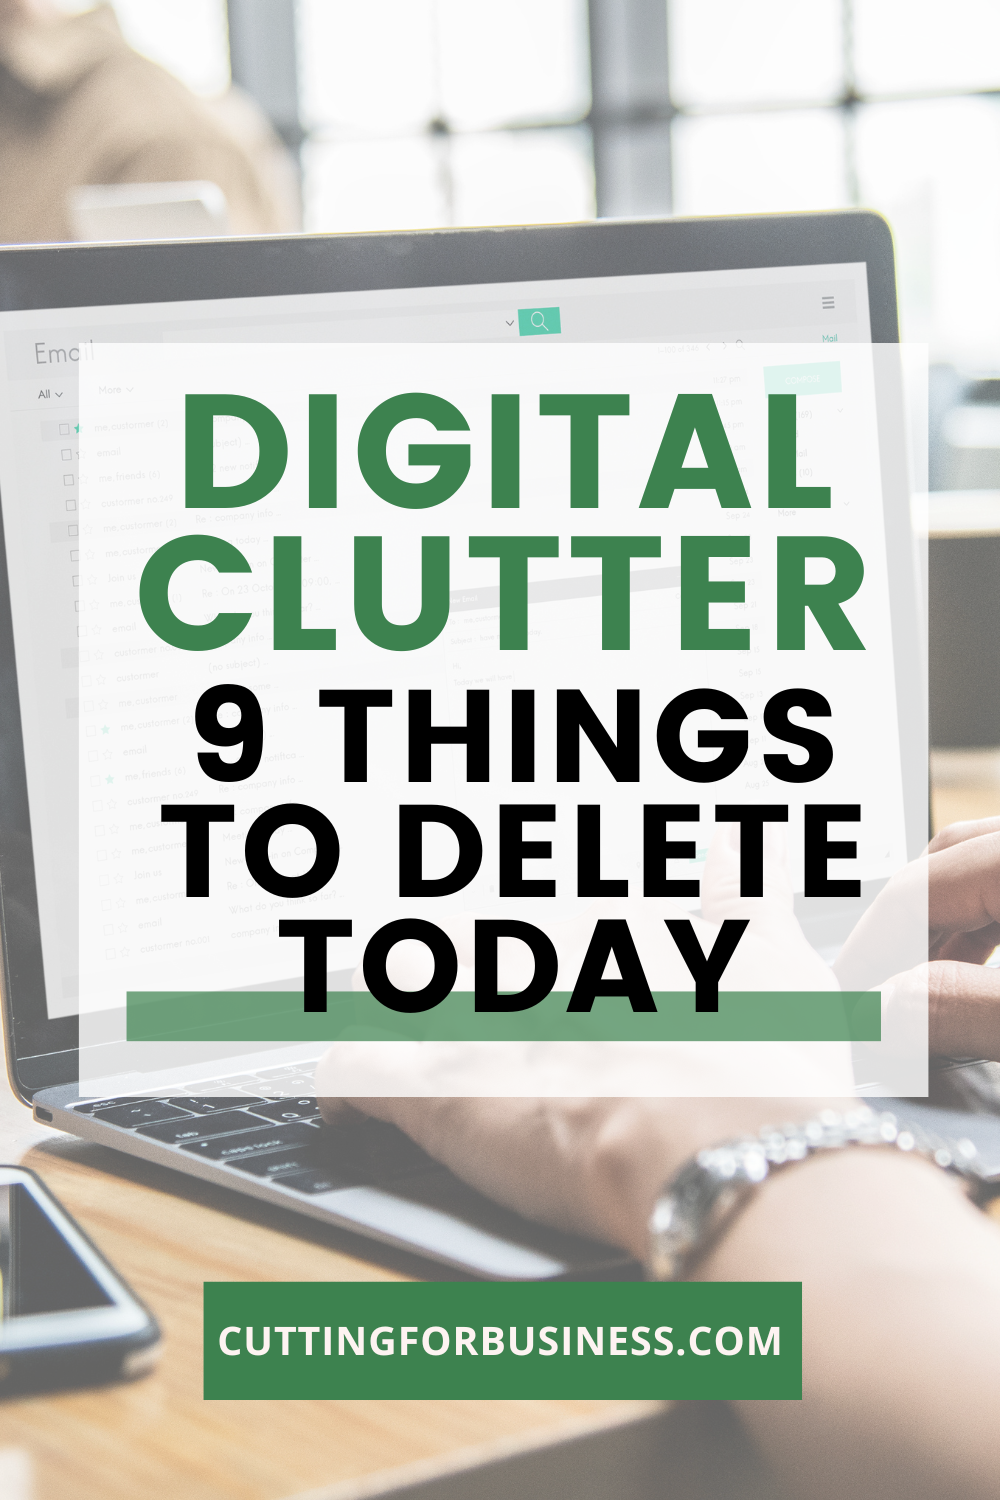 Digital Clutter - 9 Things to Delete Today - cuttingforbusiness.com.